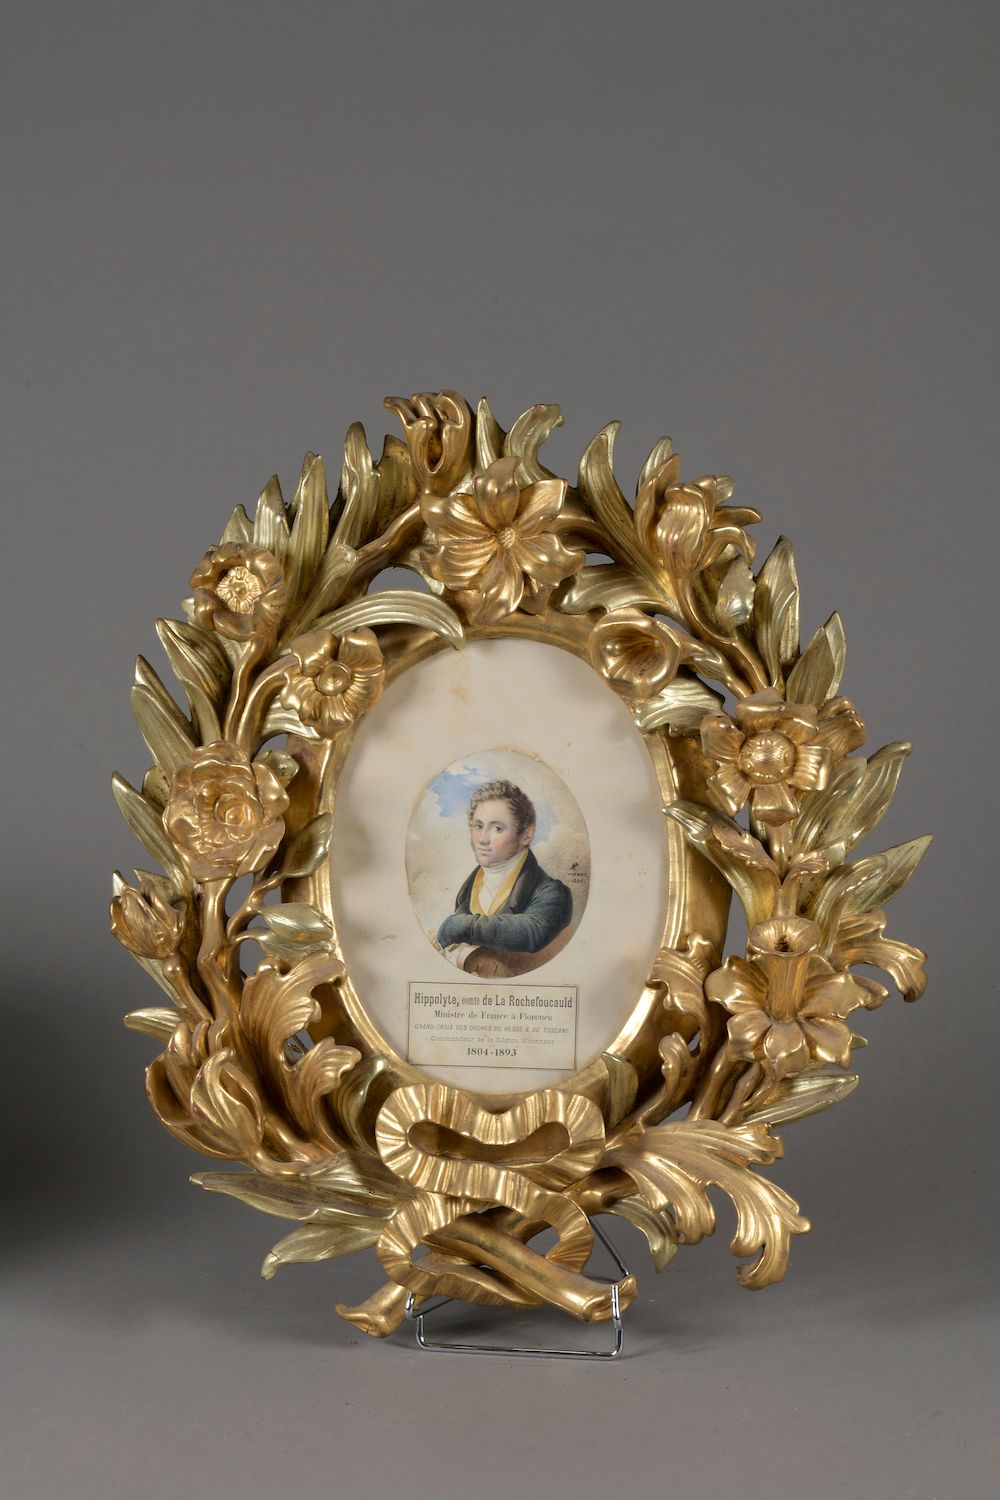 Null Austrian school of the early 19th century.

Portrait of Hippolyte, Count de&hellip;